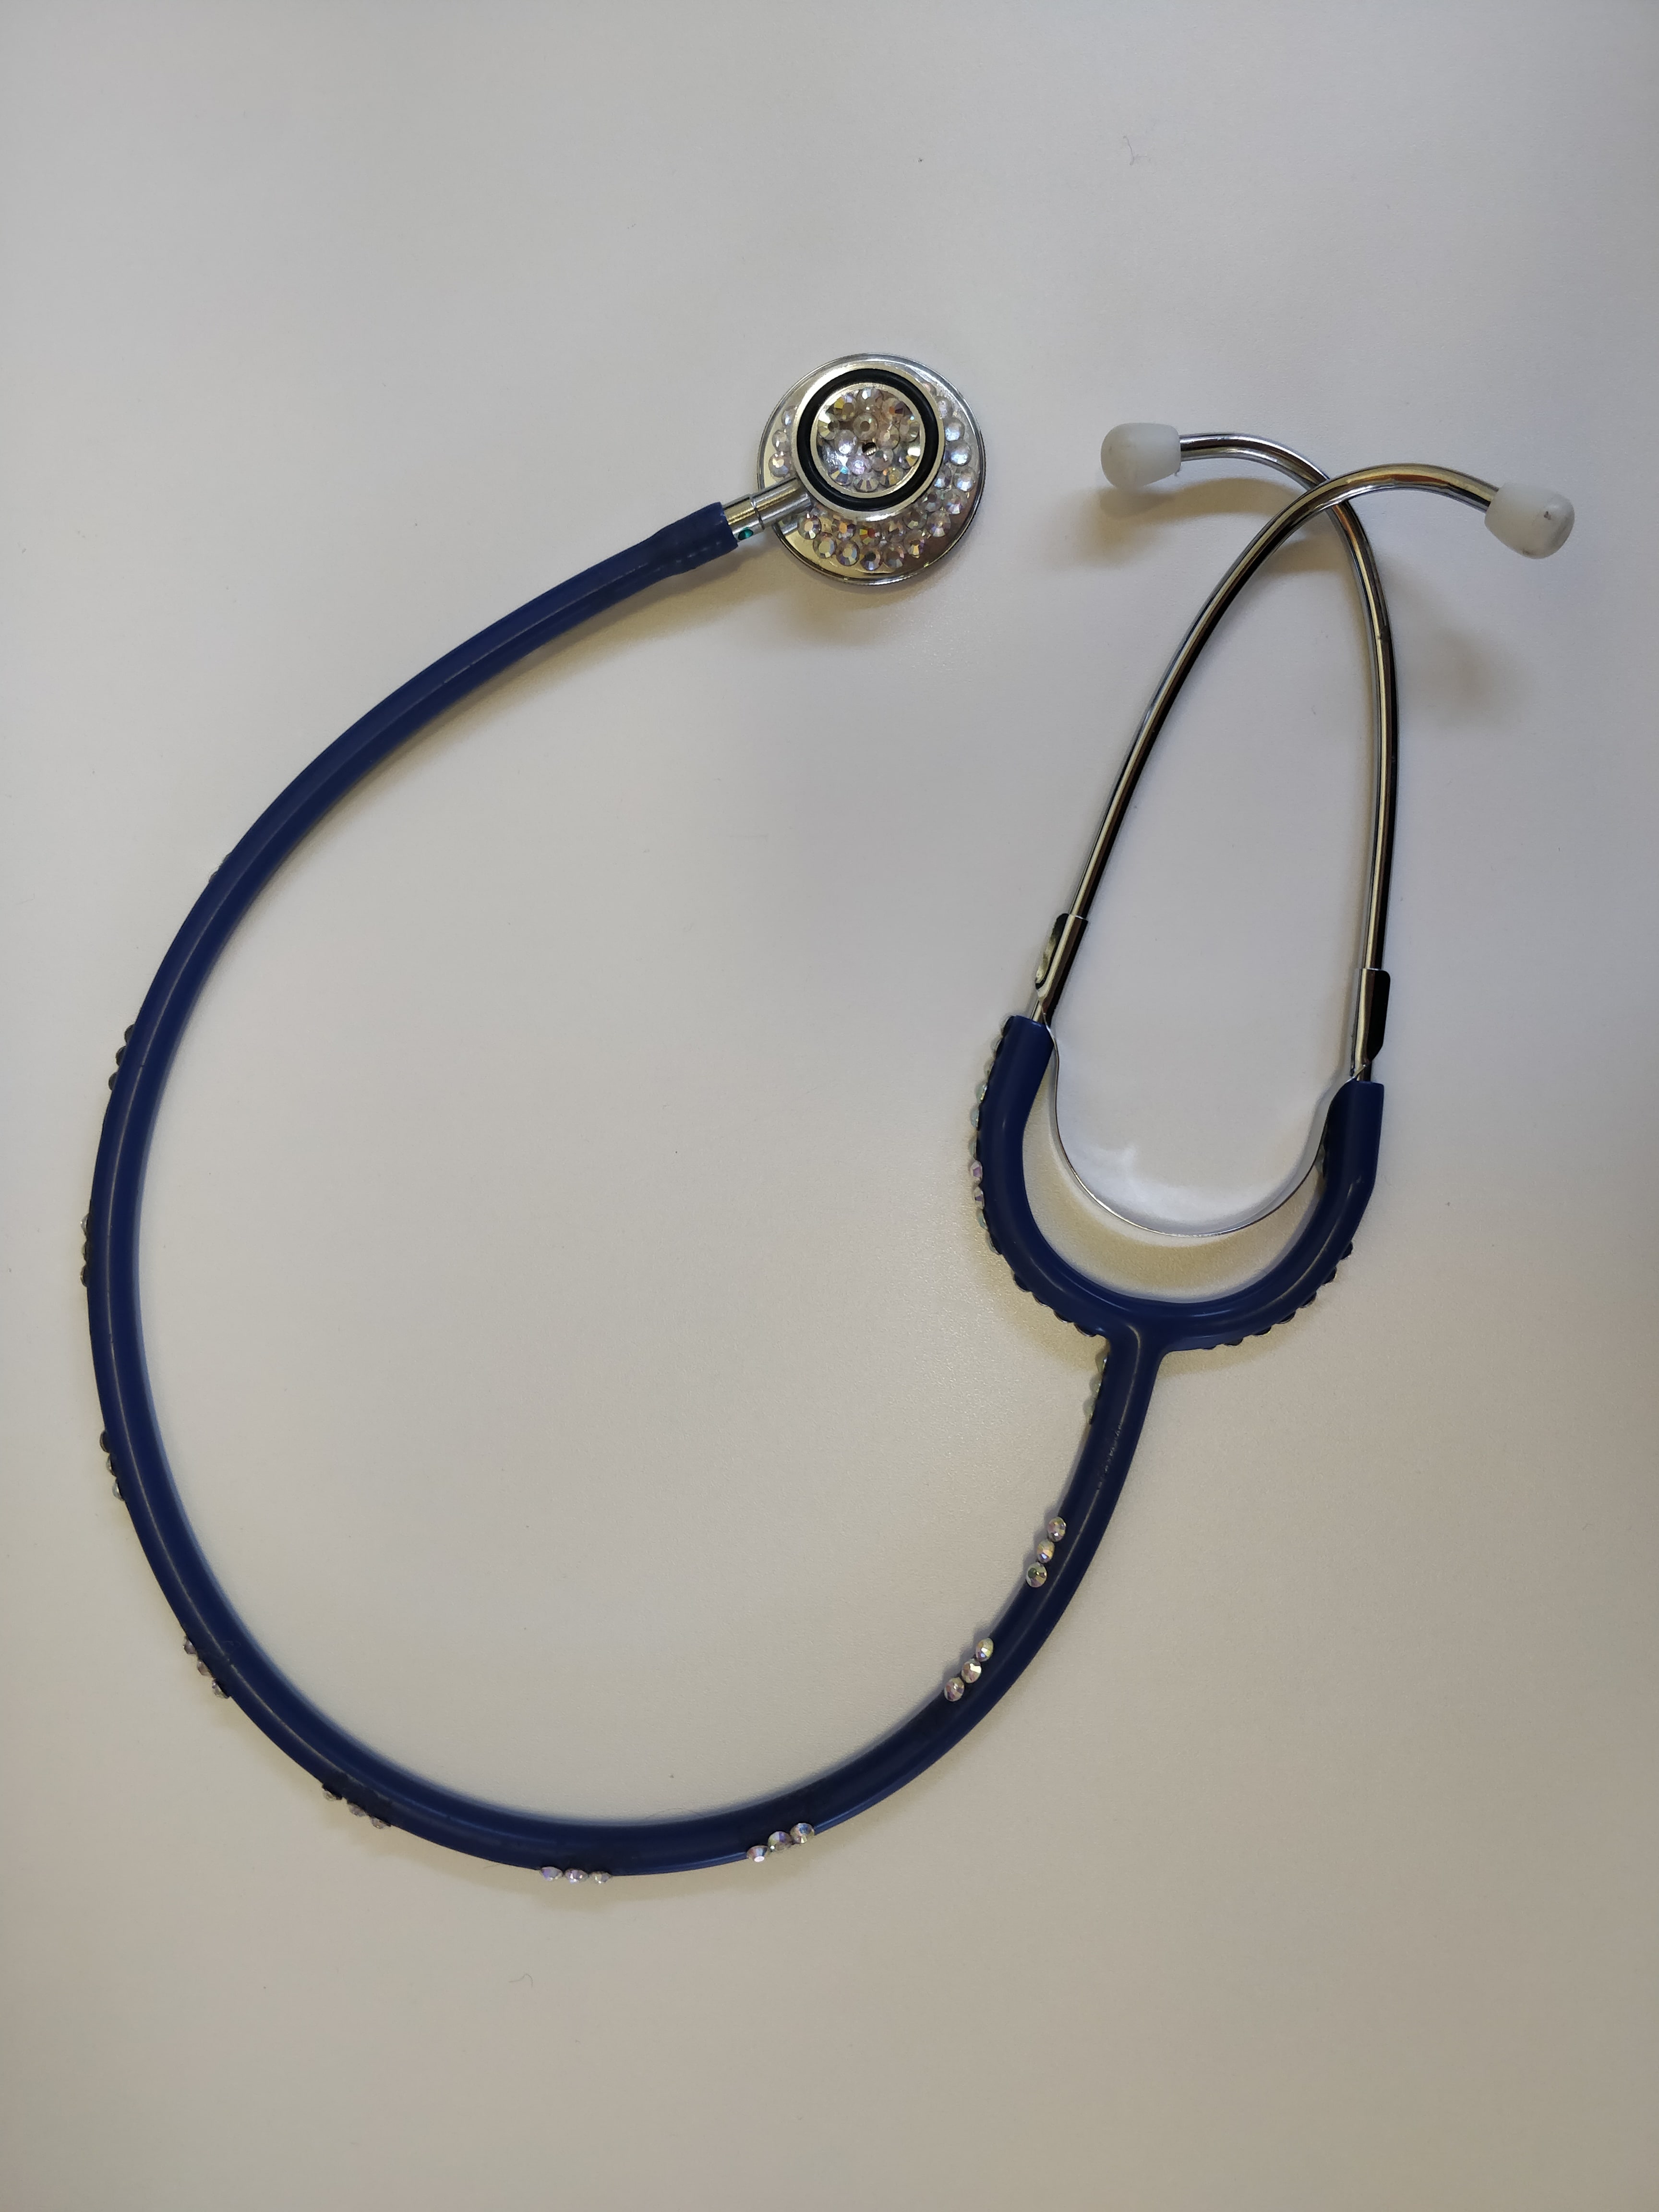 A two eared stethoscope with plastic jewels stuck on the tubing